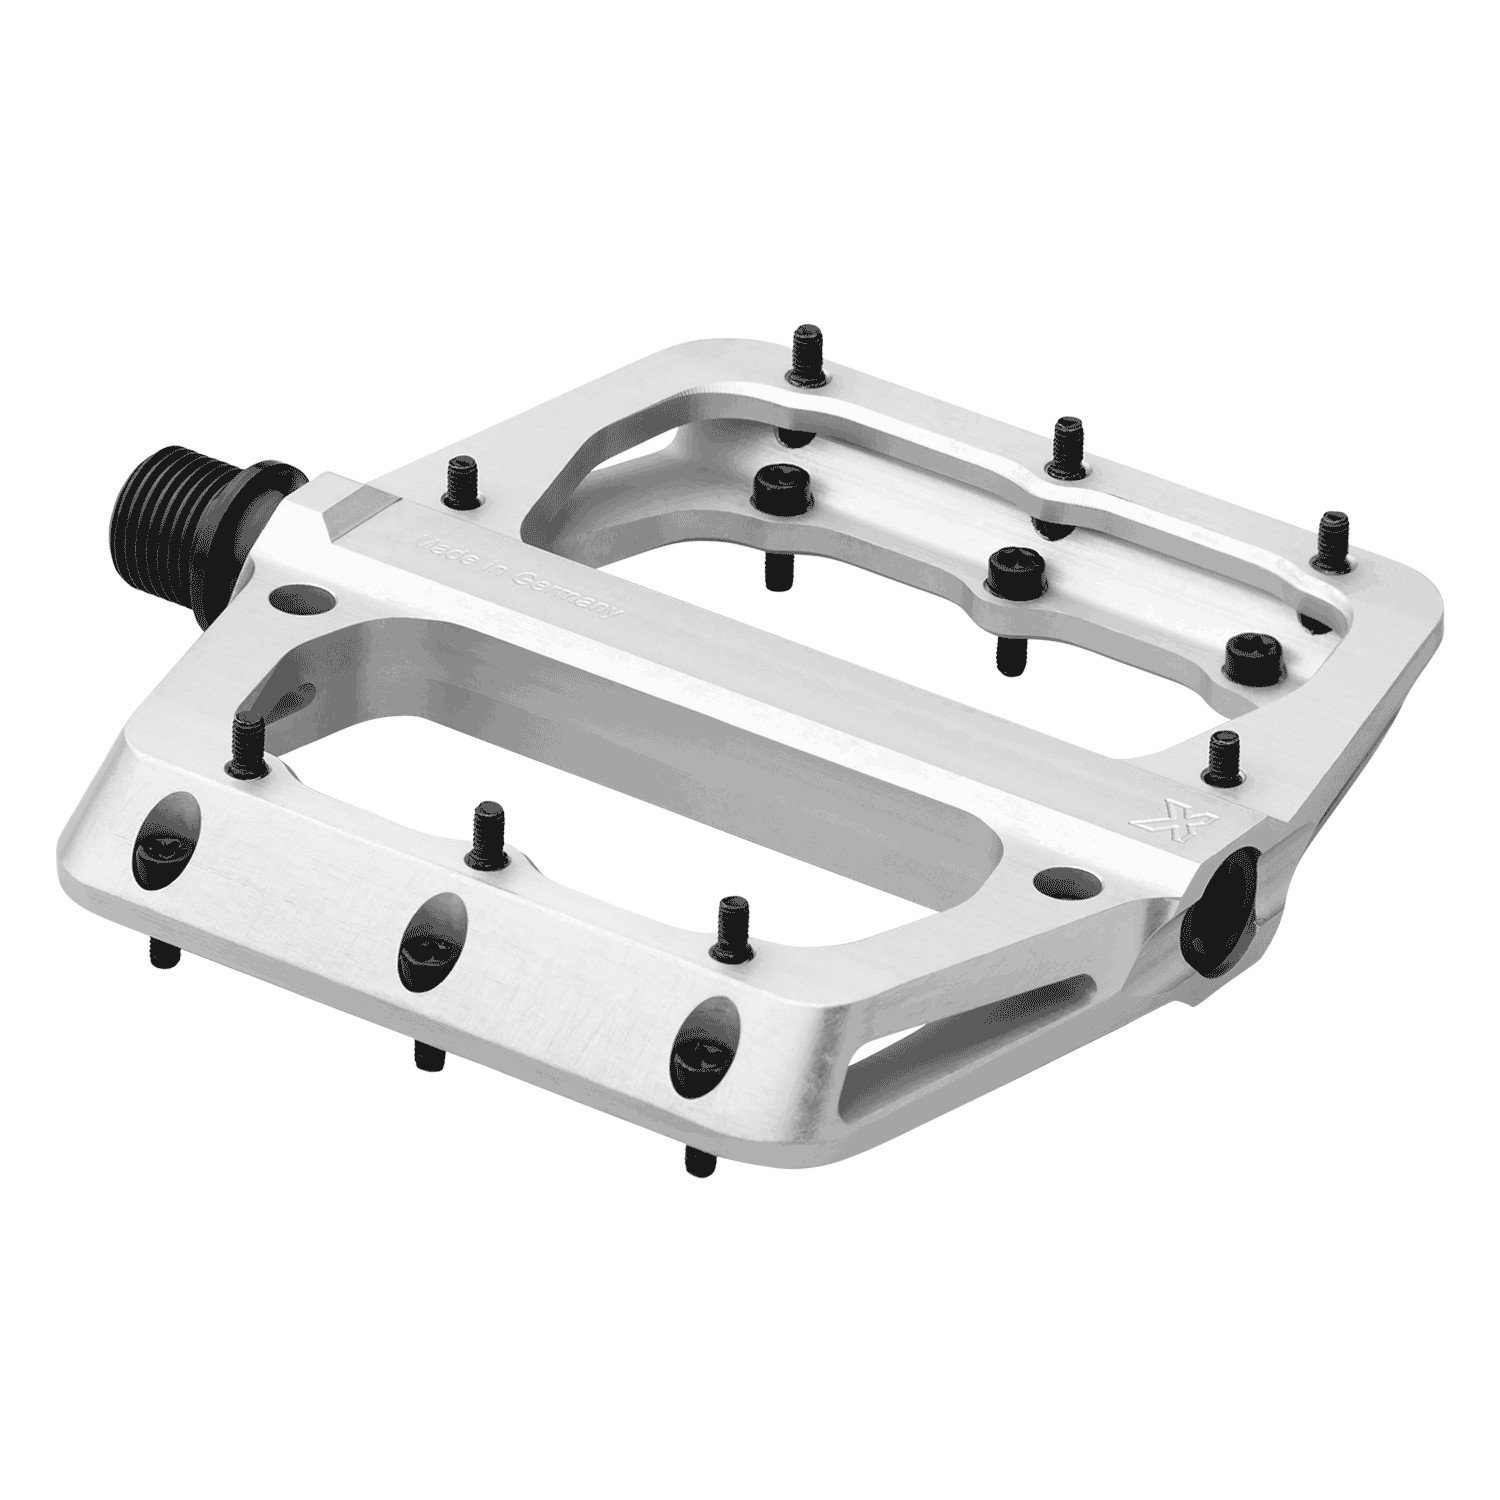 Picture of Sixpack Your Part Millenium 3.0 Pedals - Raw